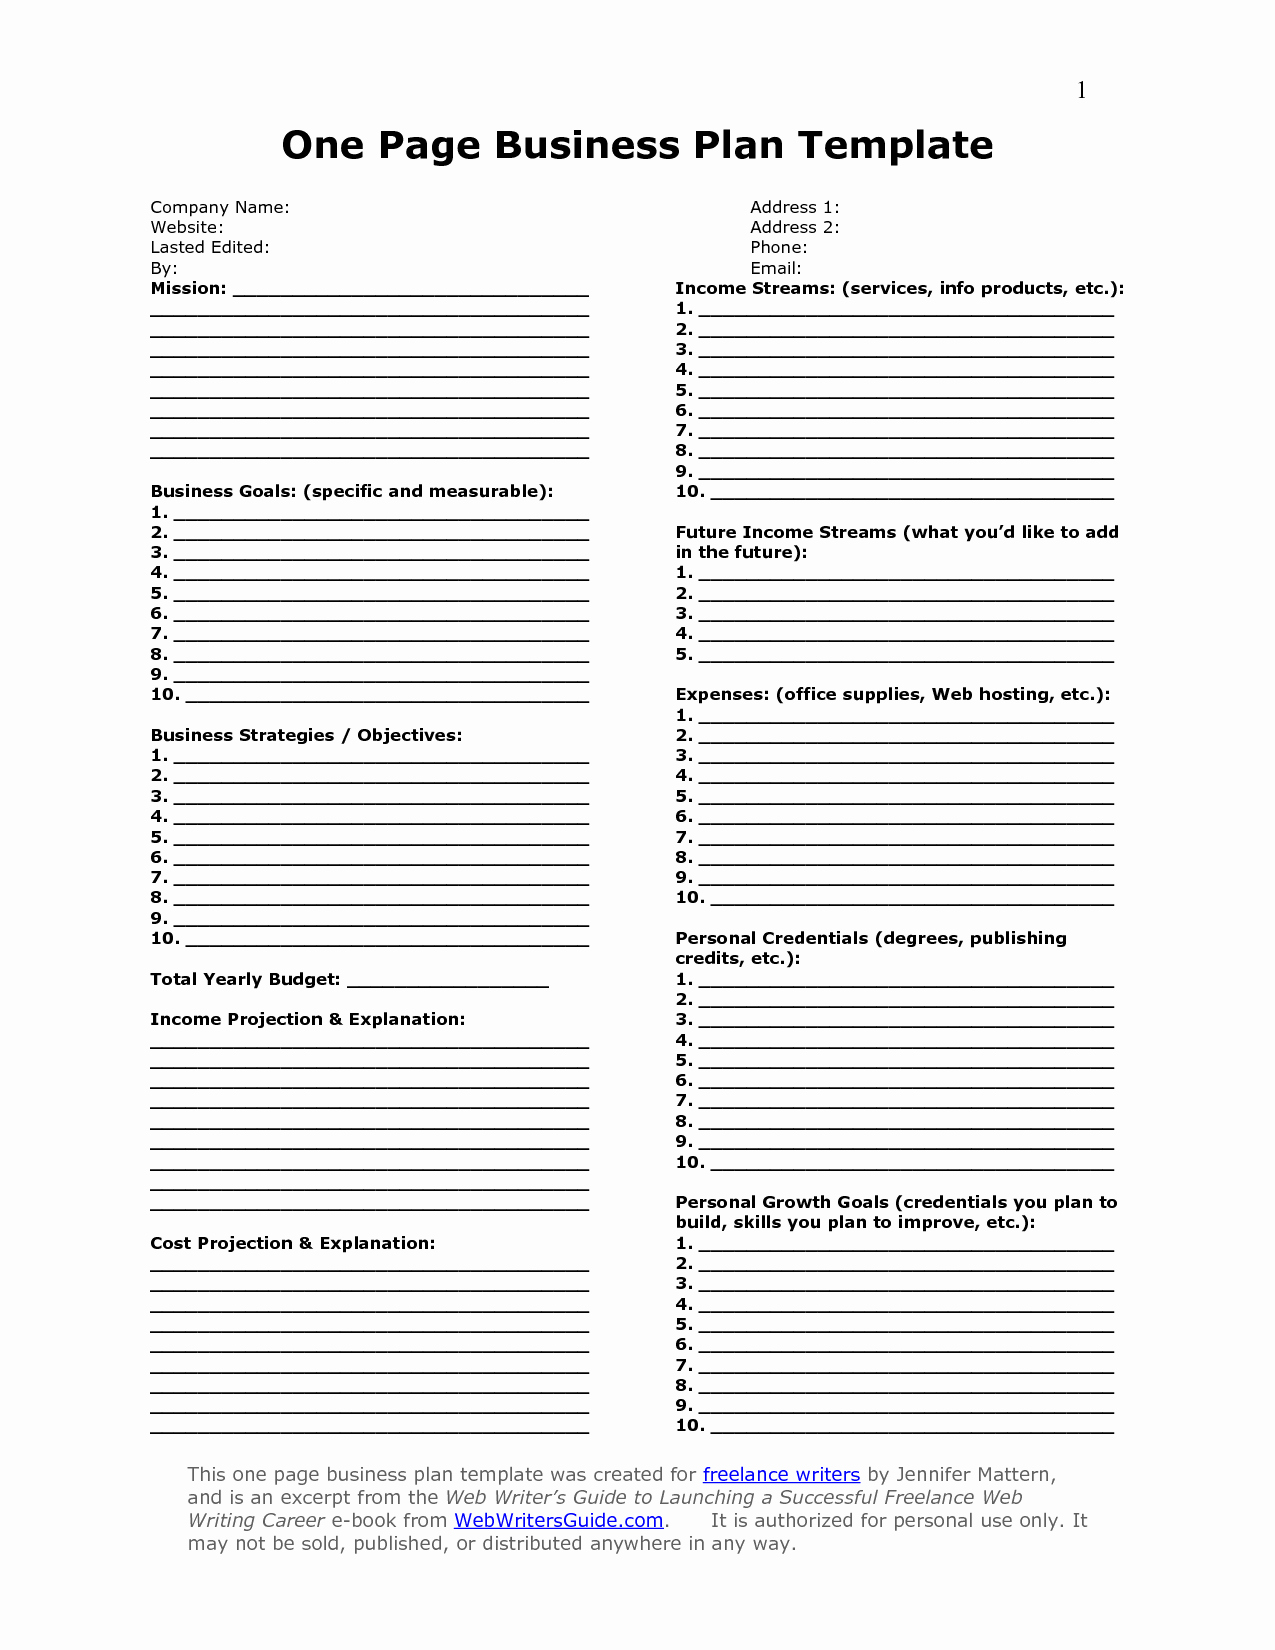 One Page Business Plan Pdf Beautiful E Page Business Plan Template